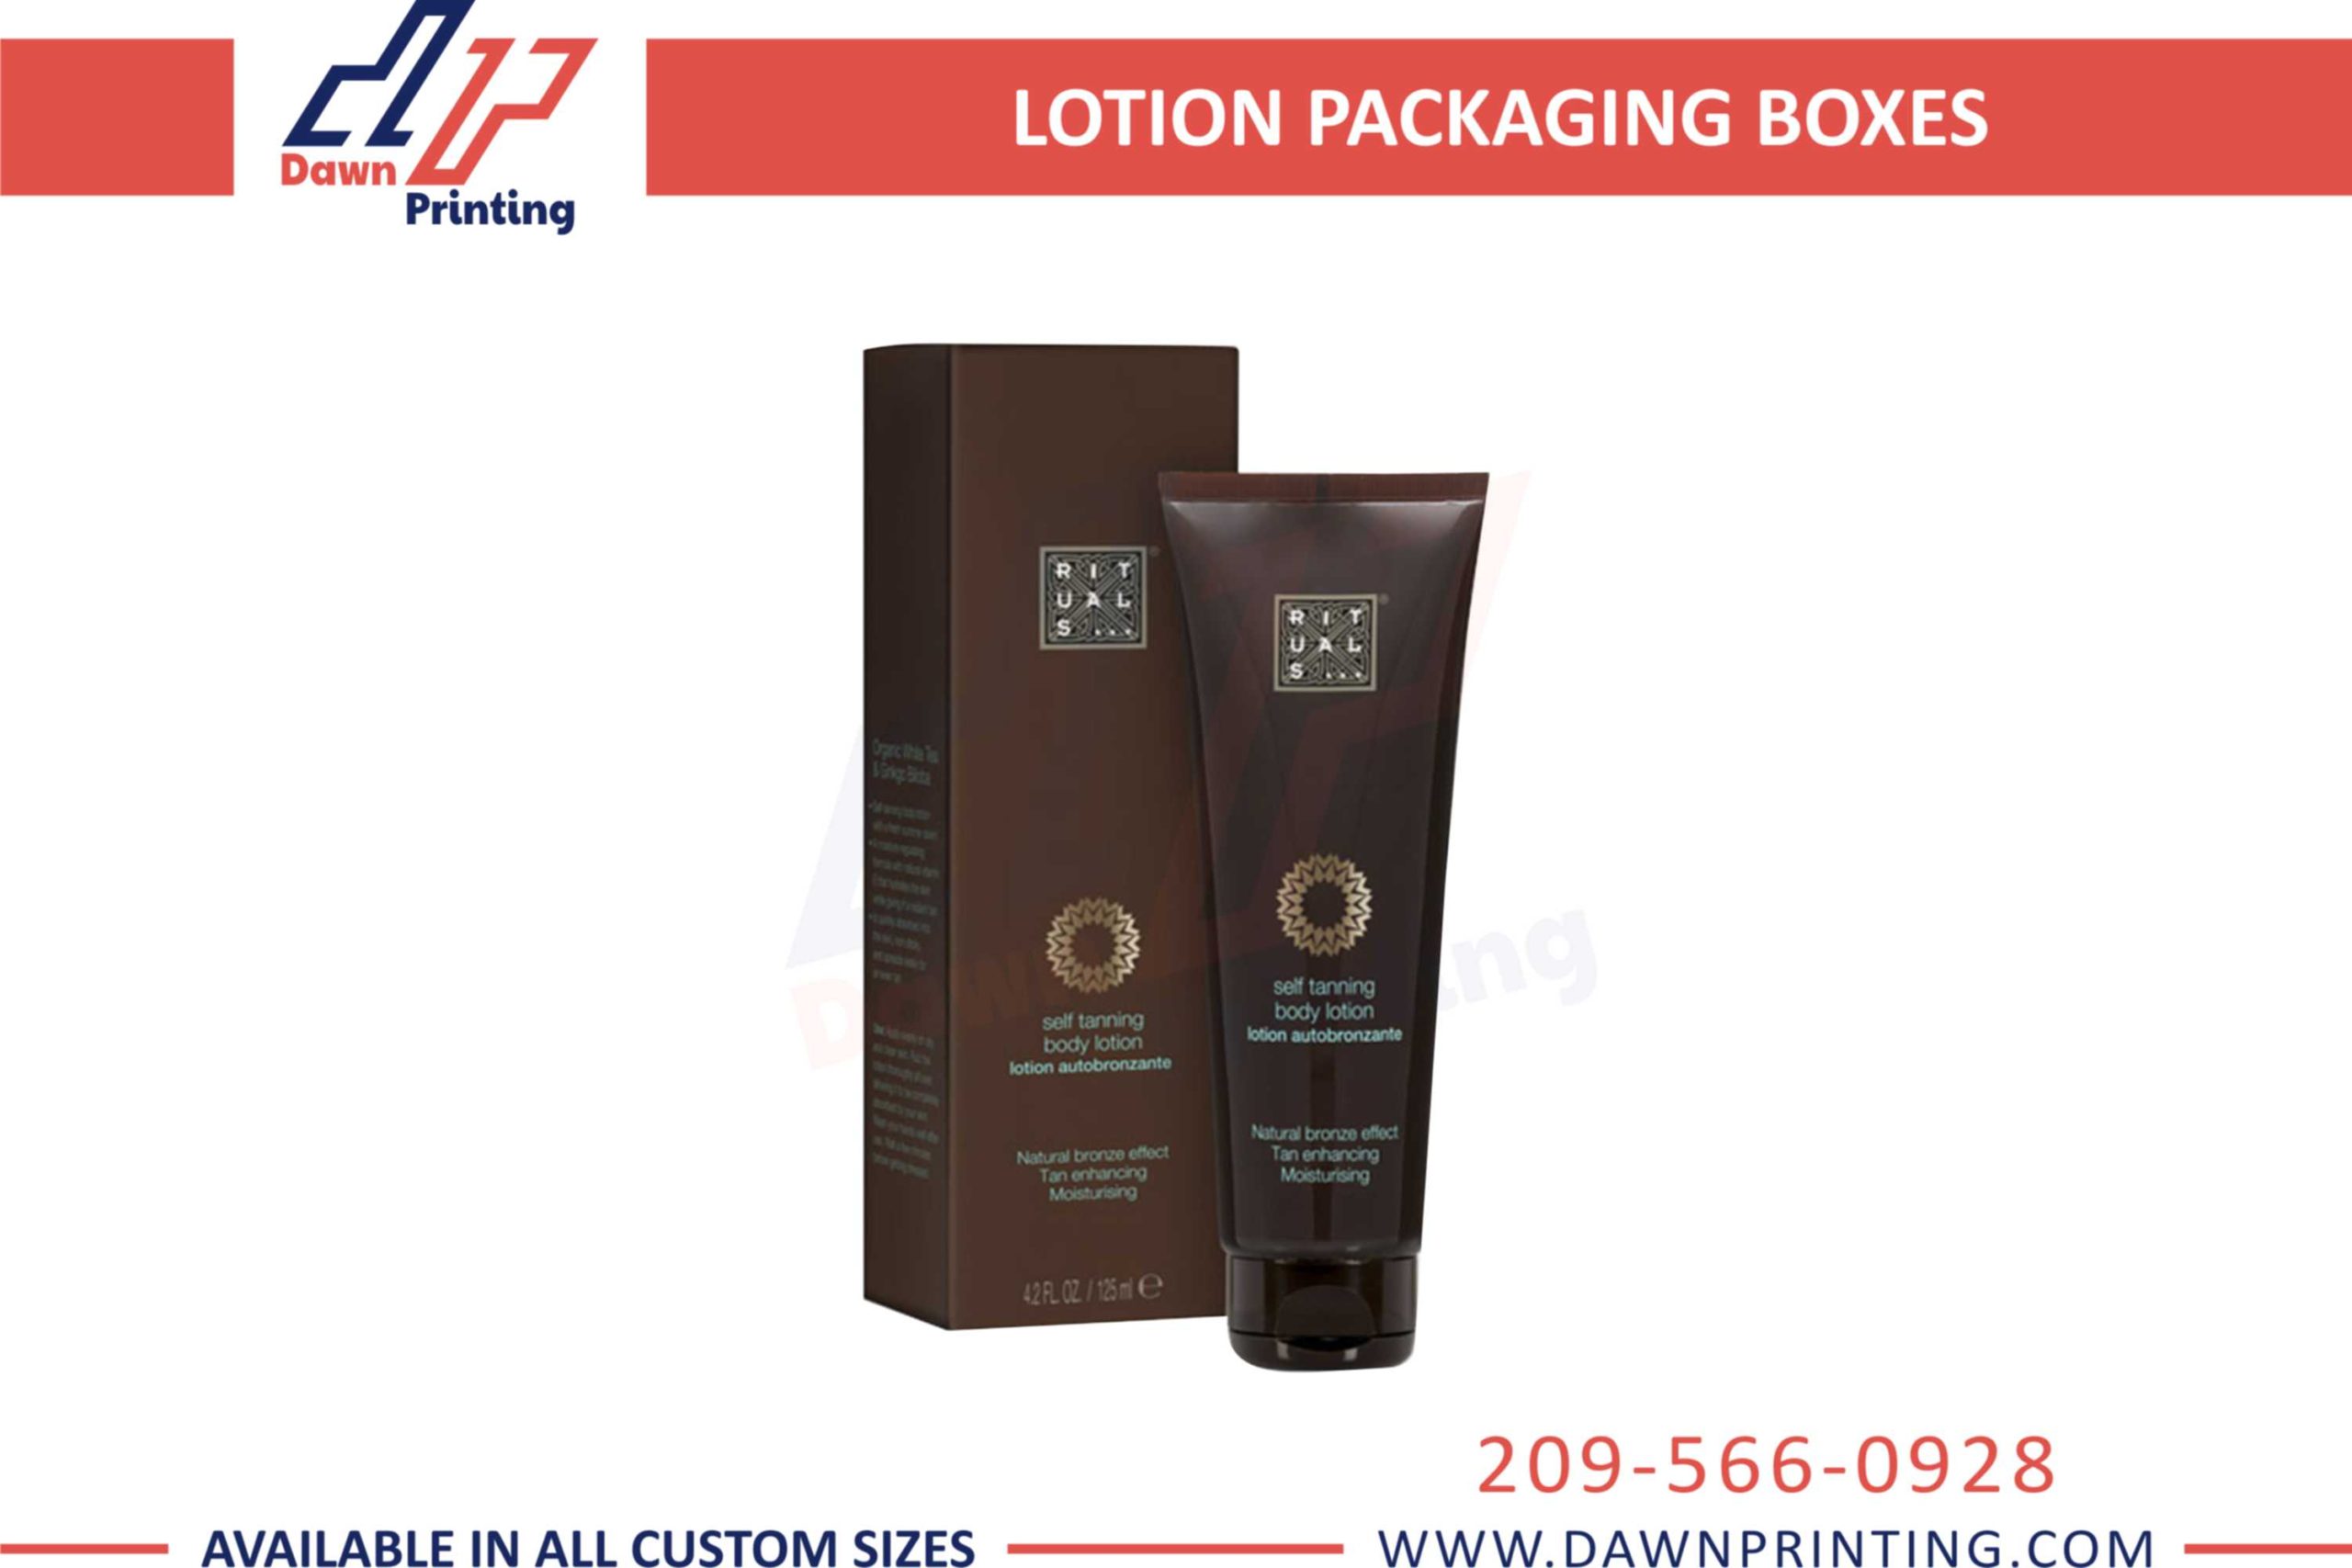 Dawn Printing - Lotion boxes manufactures USA